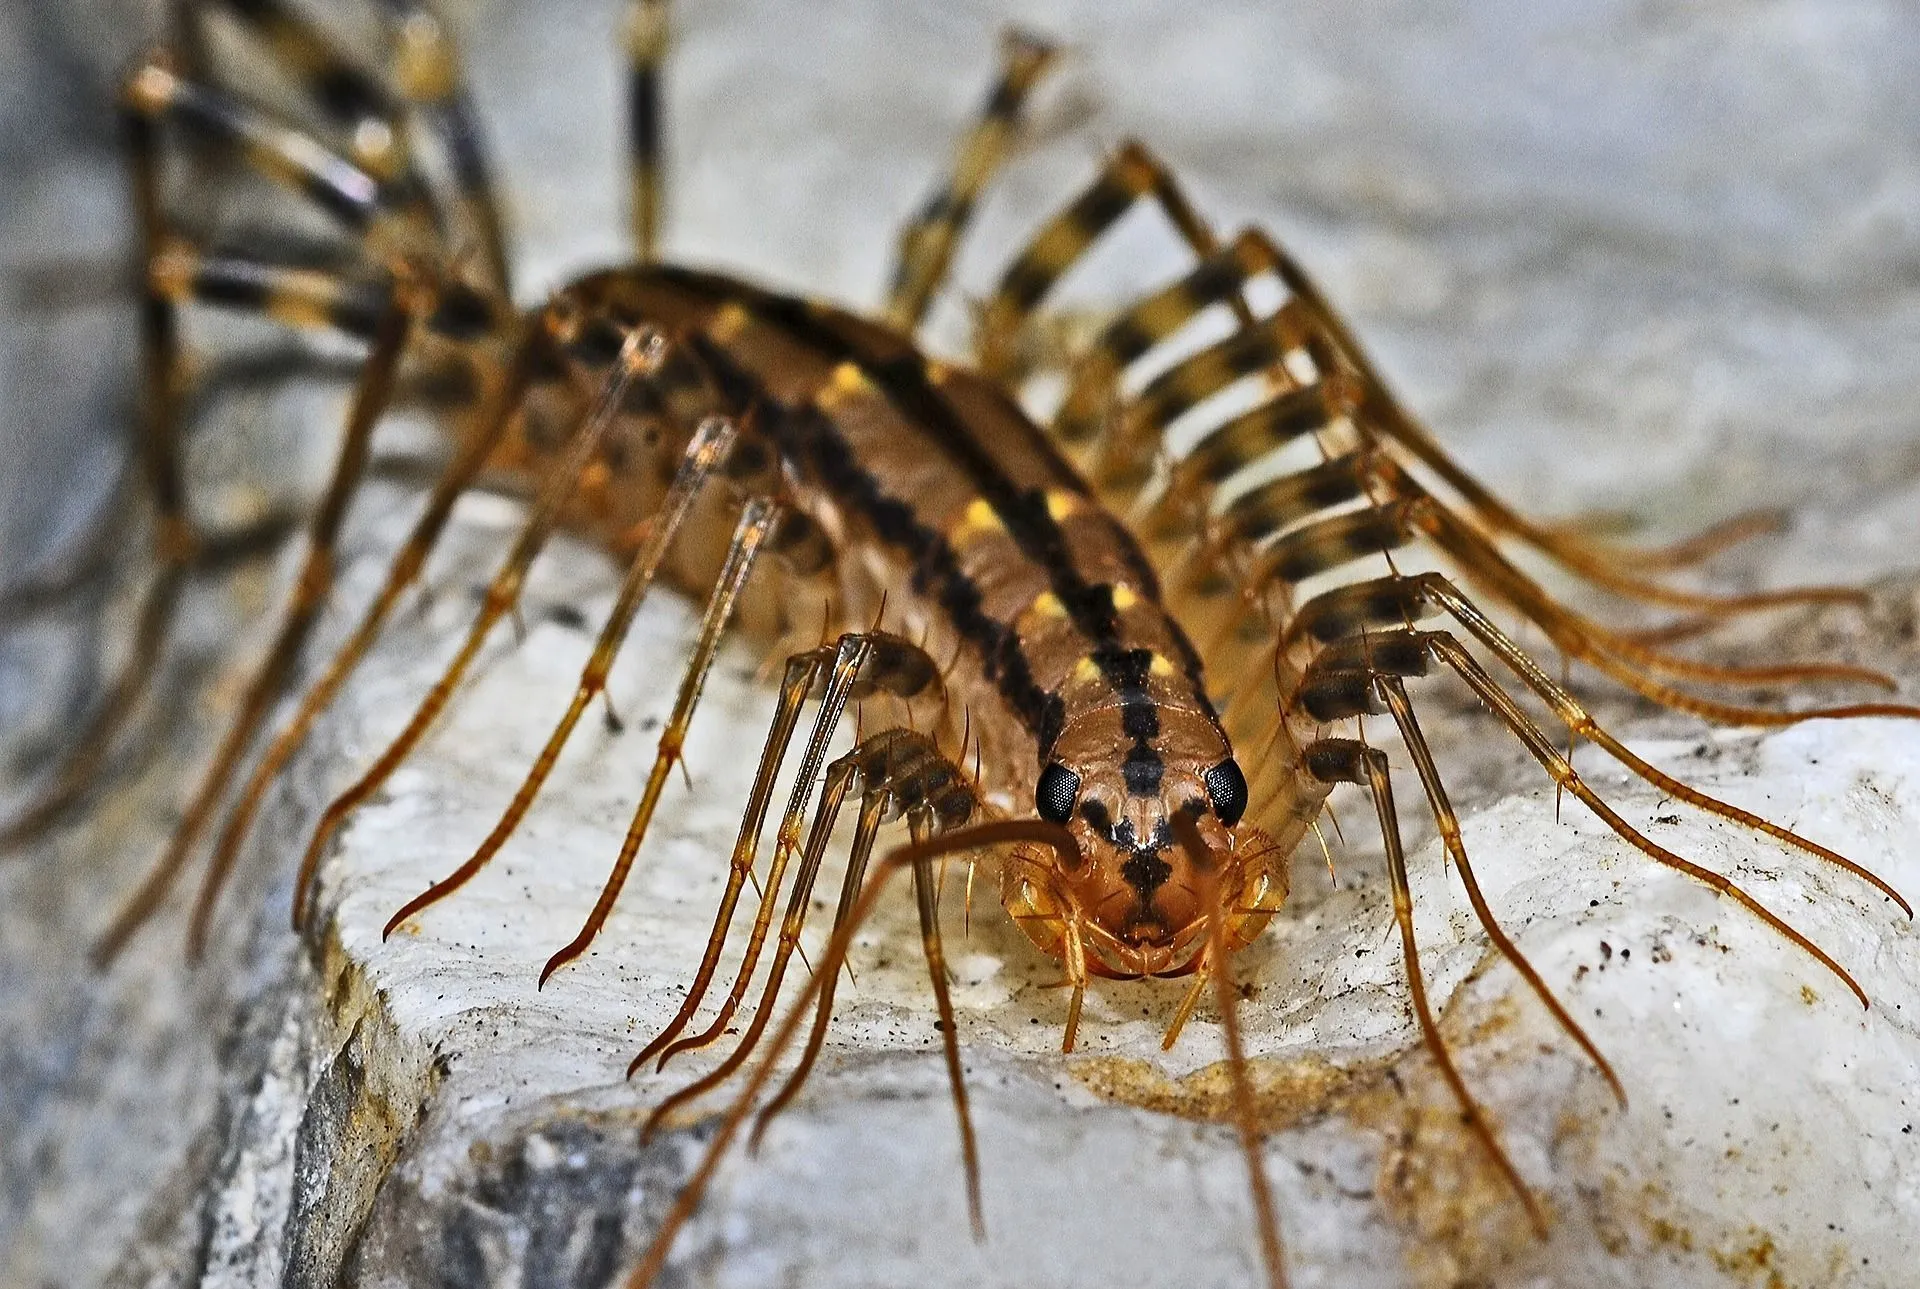 Centipede vs millipede: There are many differences between the two arthropods including the number of legs.